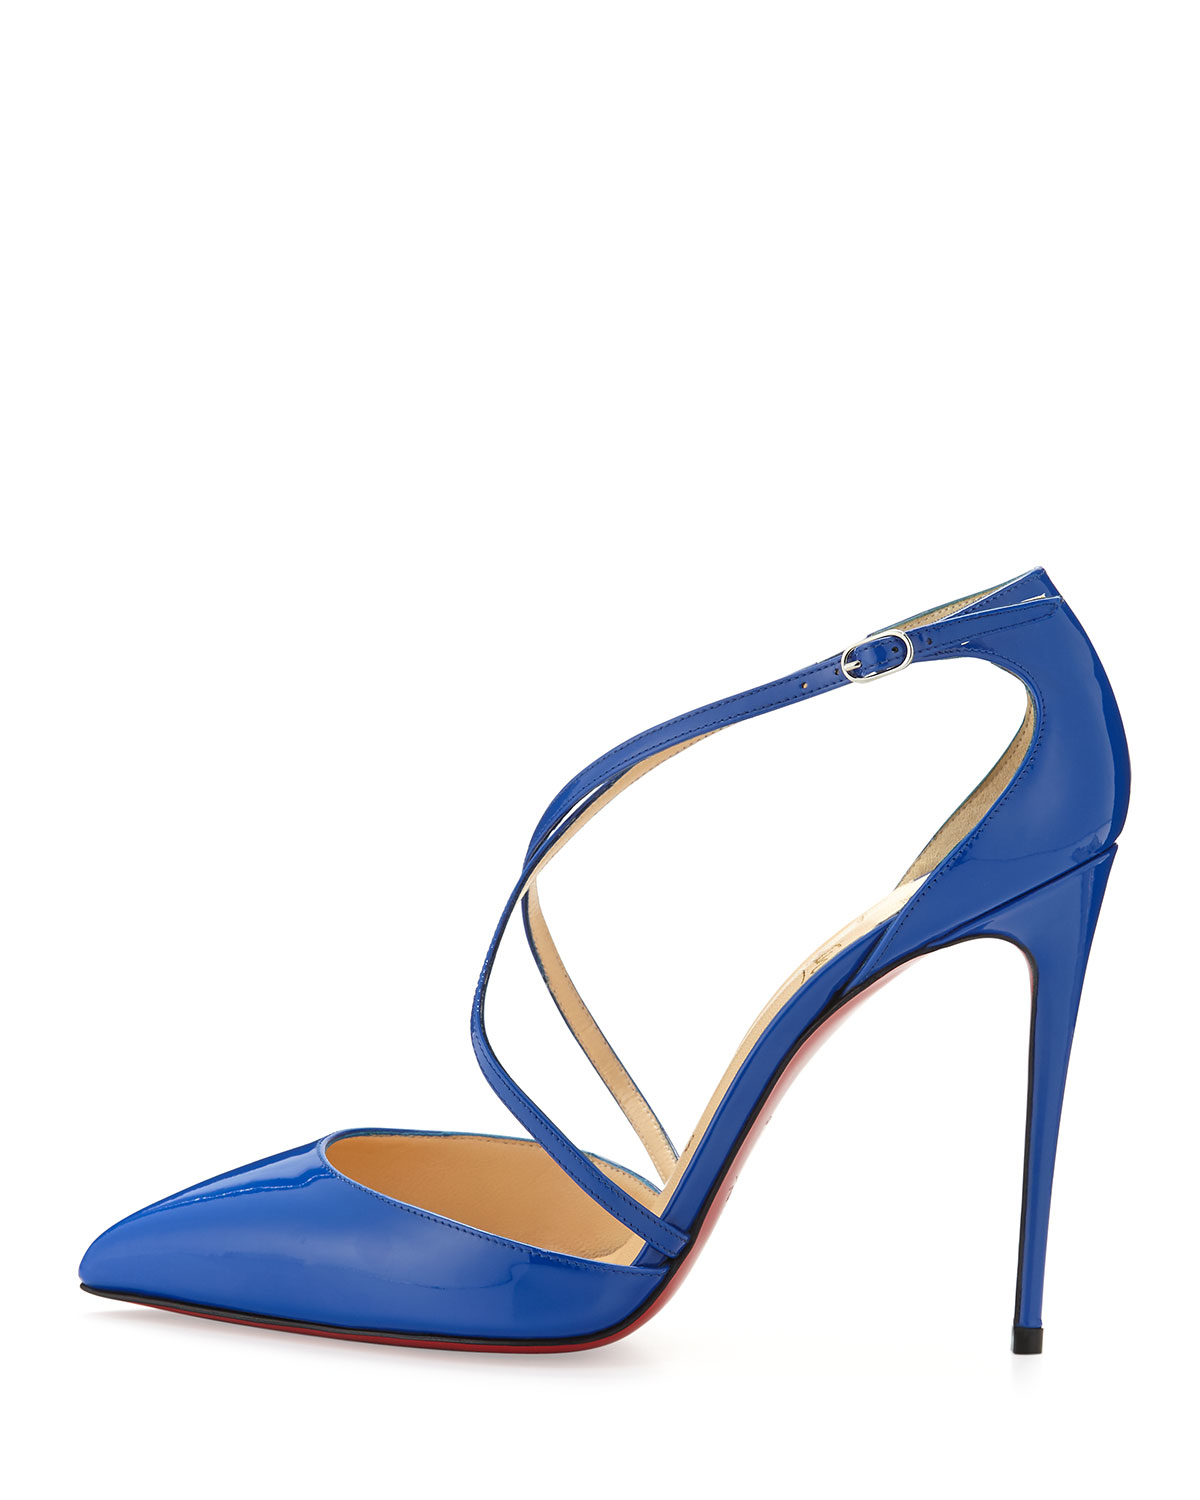 Christian louboutin Cross Blake 100mm Patent Red Sole Pump in Blue ...